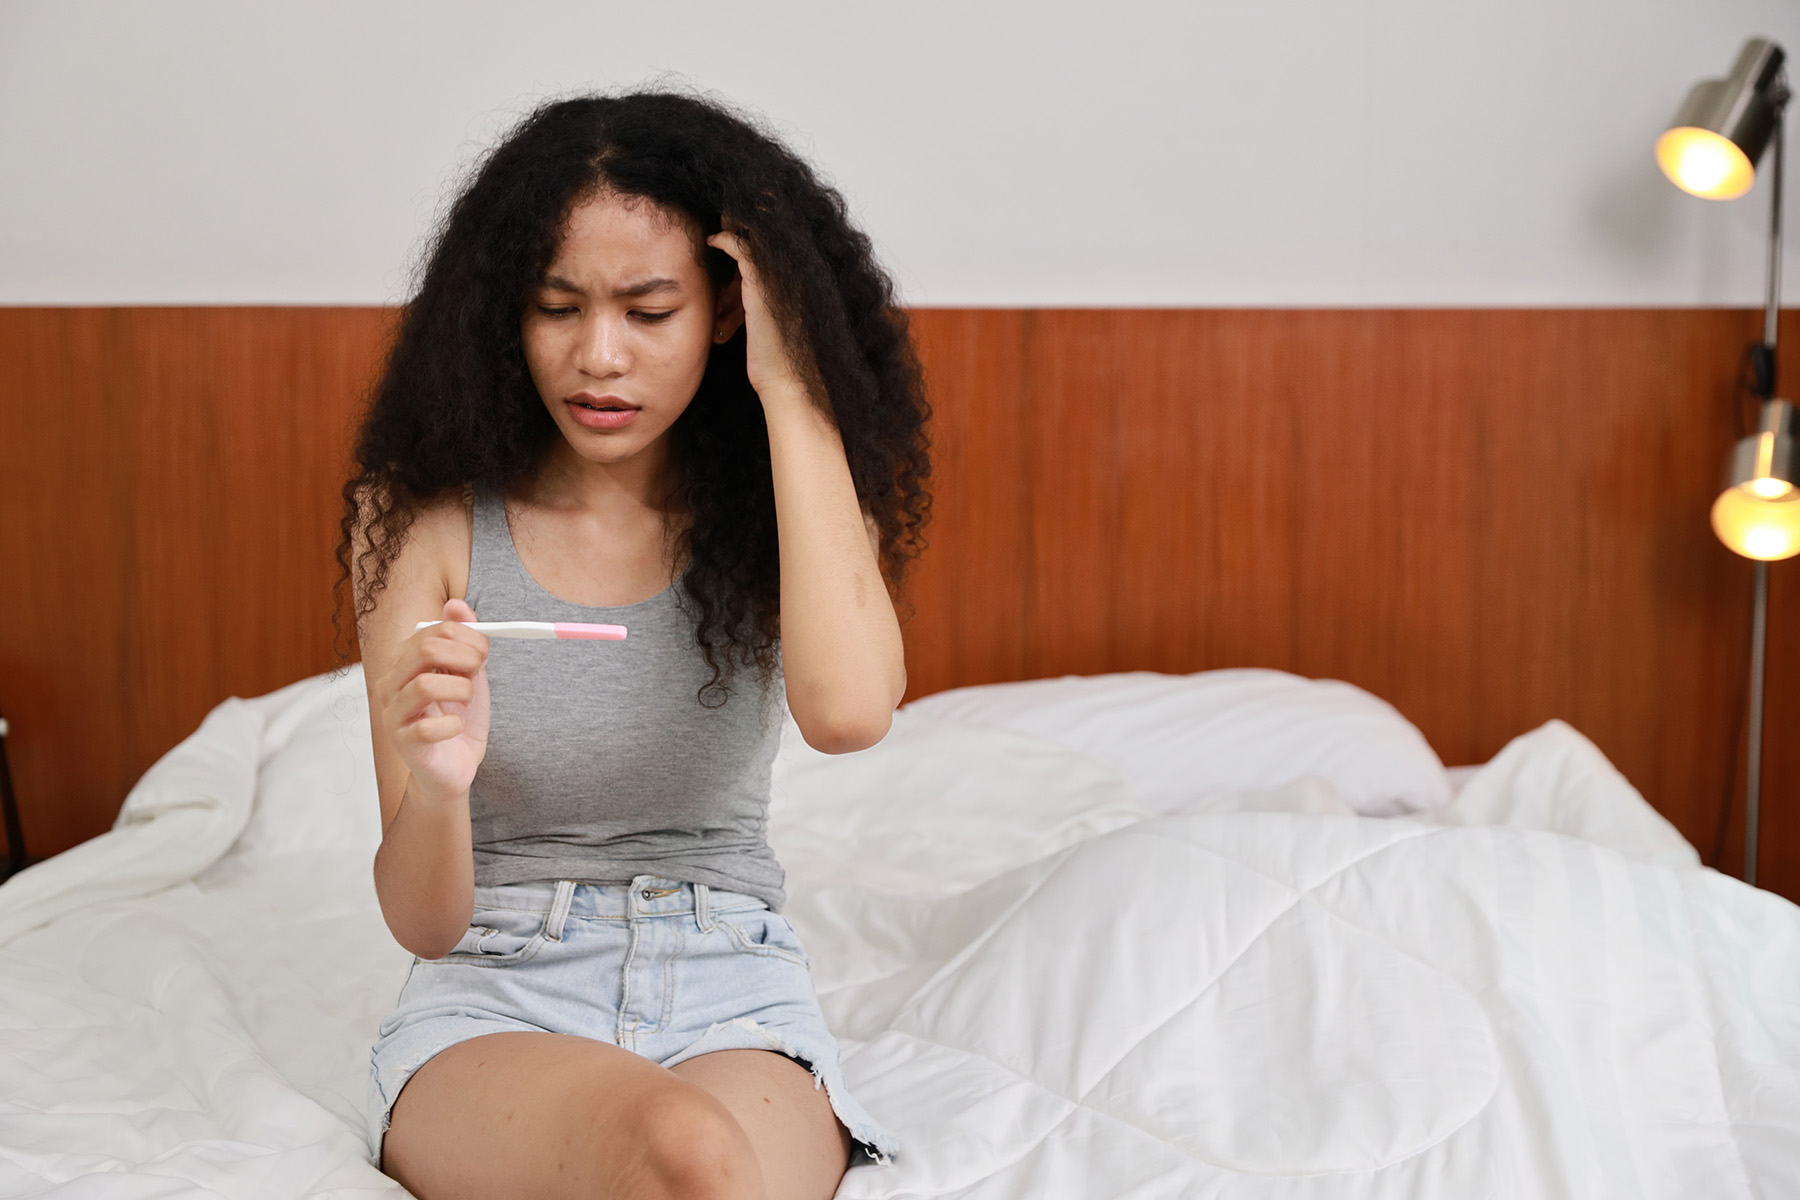 Pensive looking young woman sitting on a bed, while scratching her head and looking at a pregnancy test.